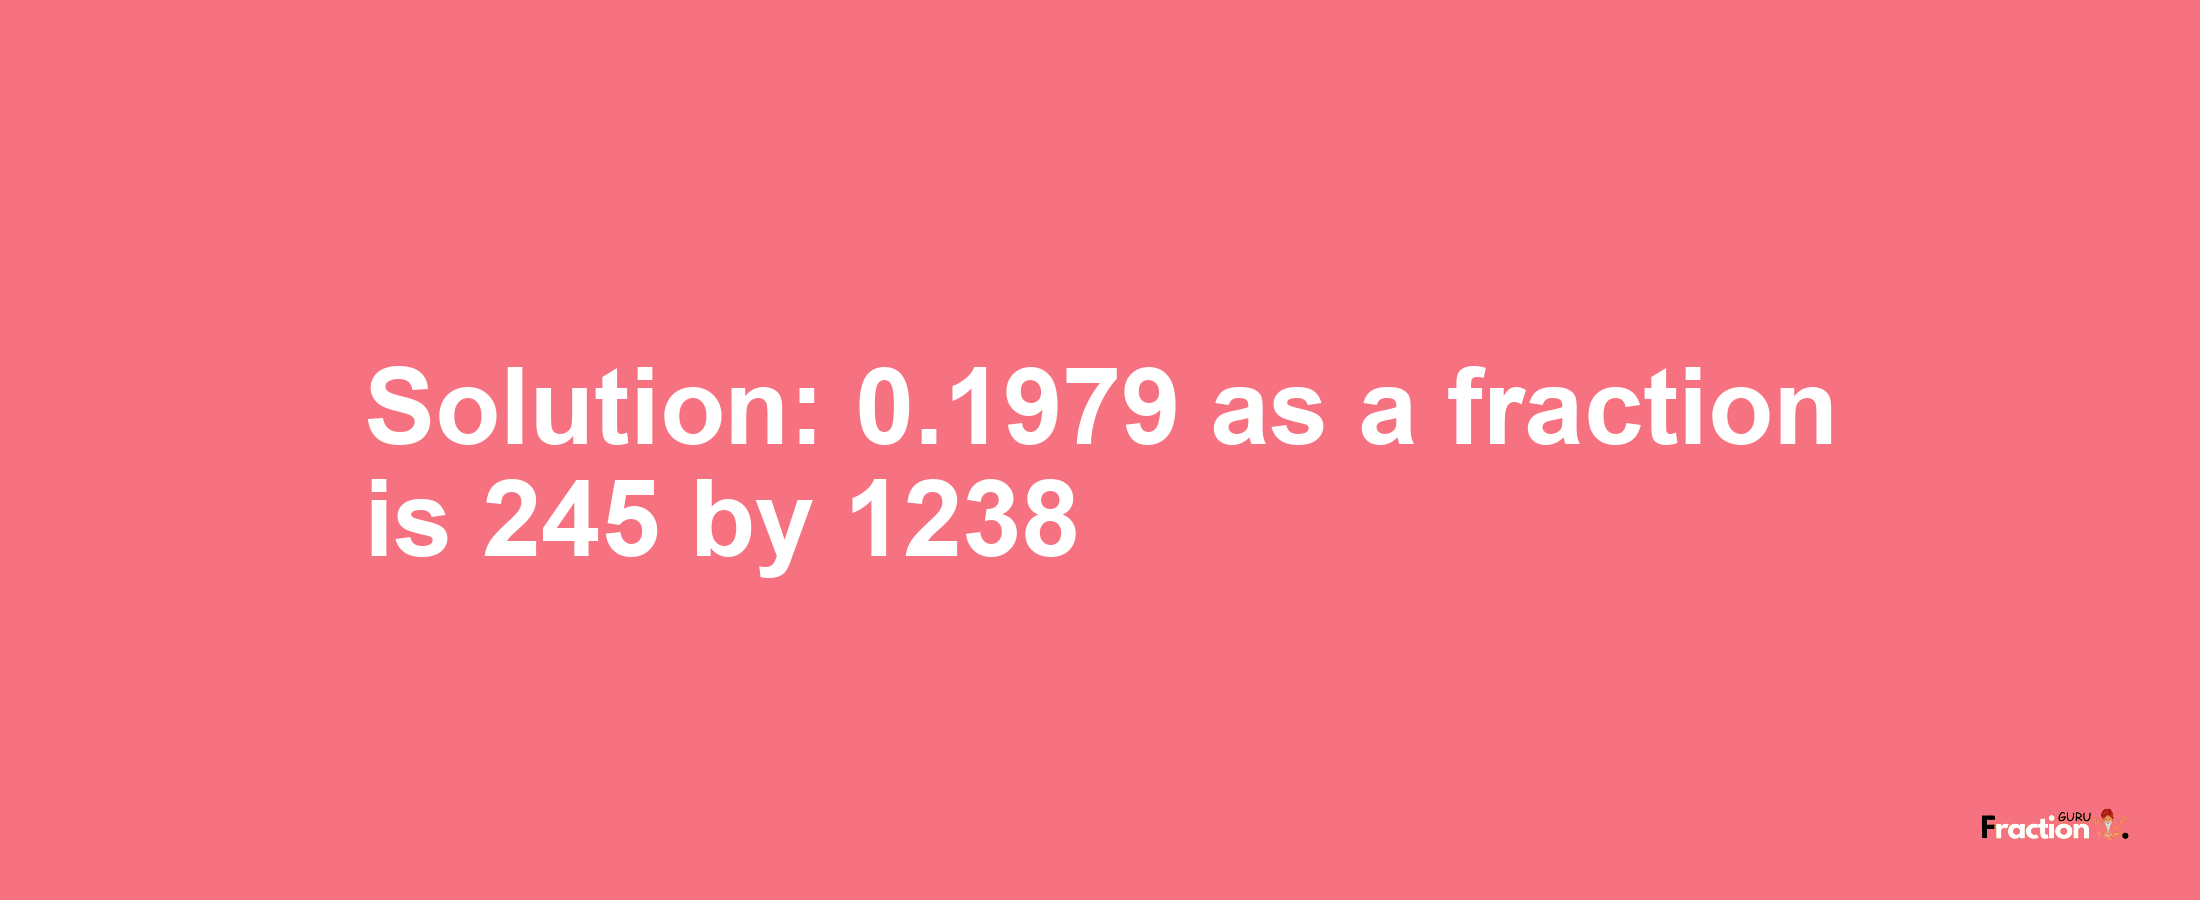 Solution:0.1979 as a fraction is 245/1238